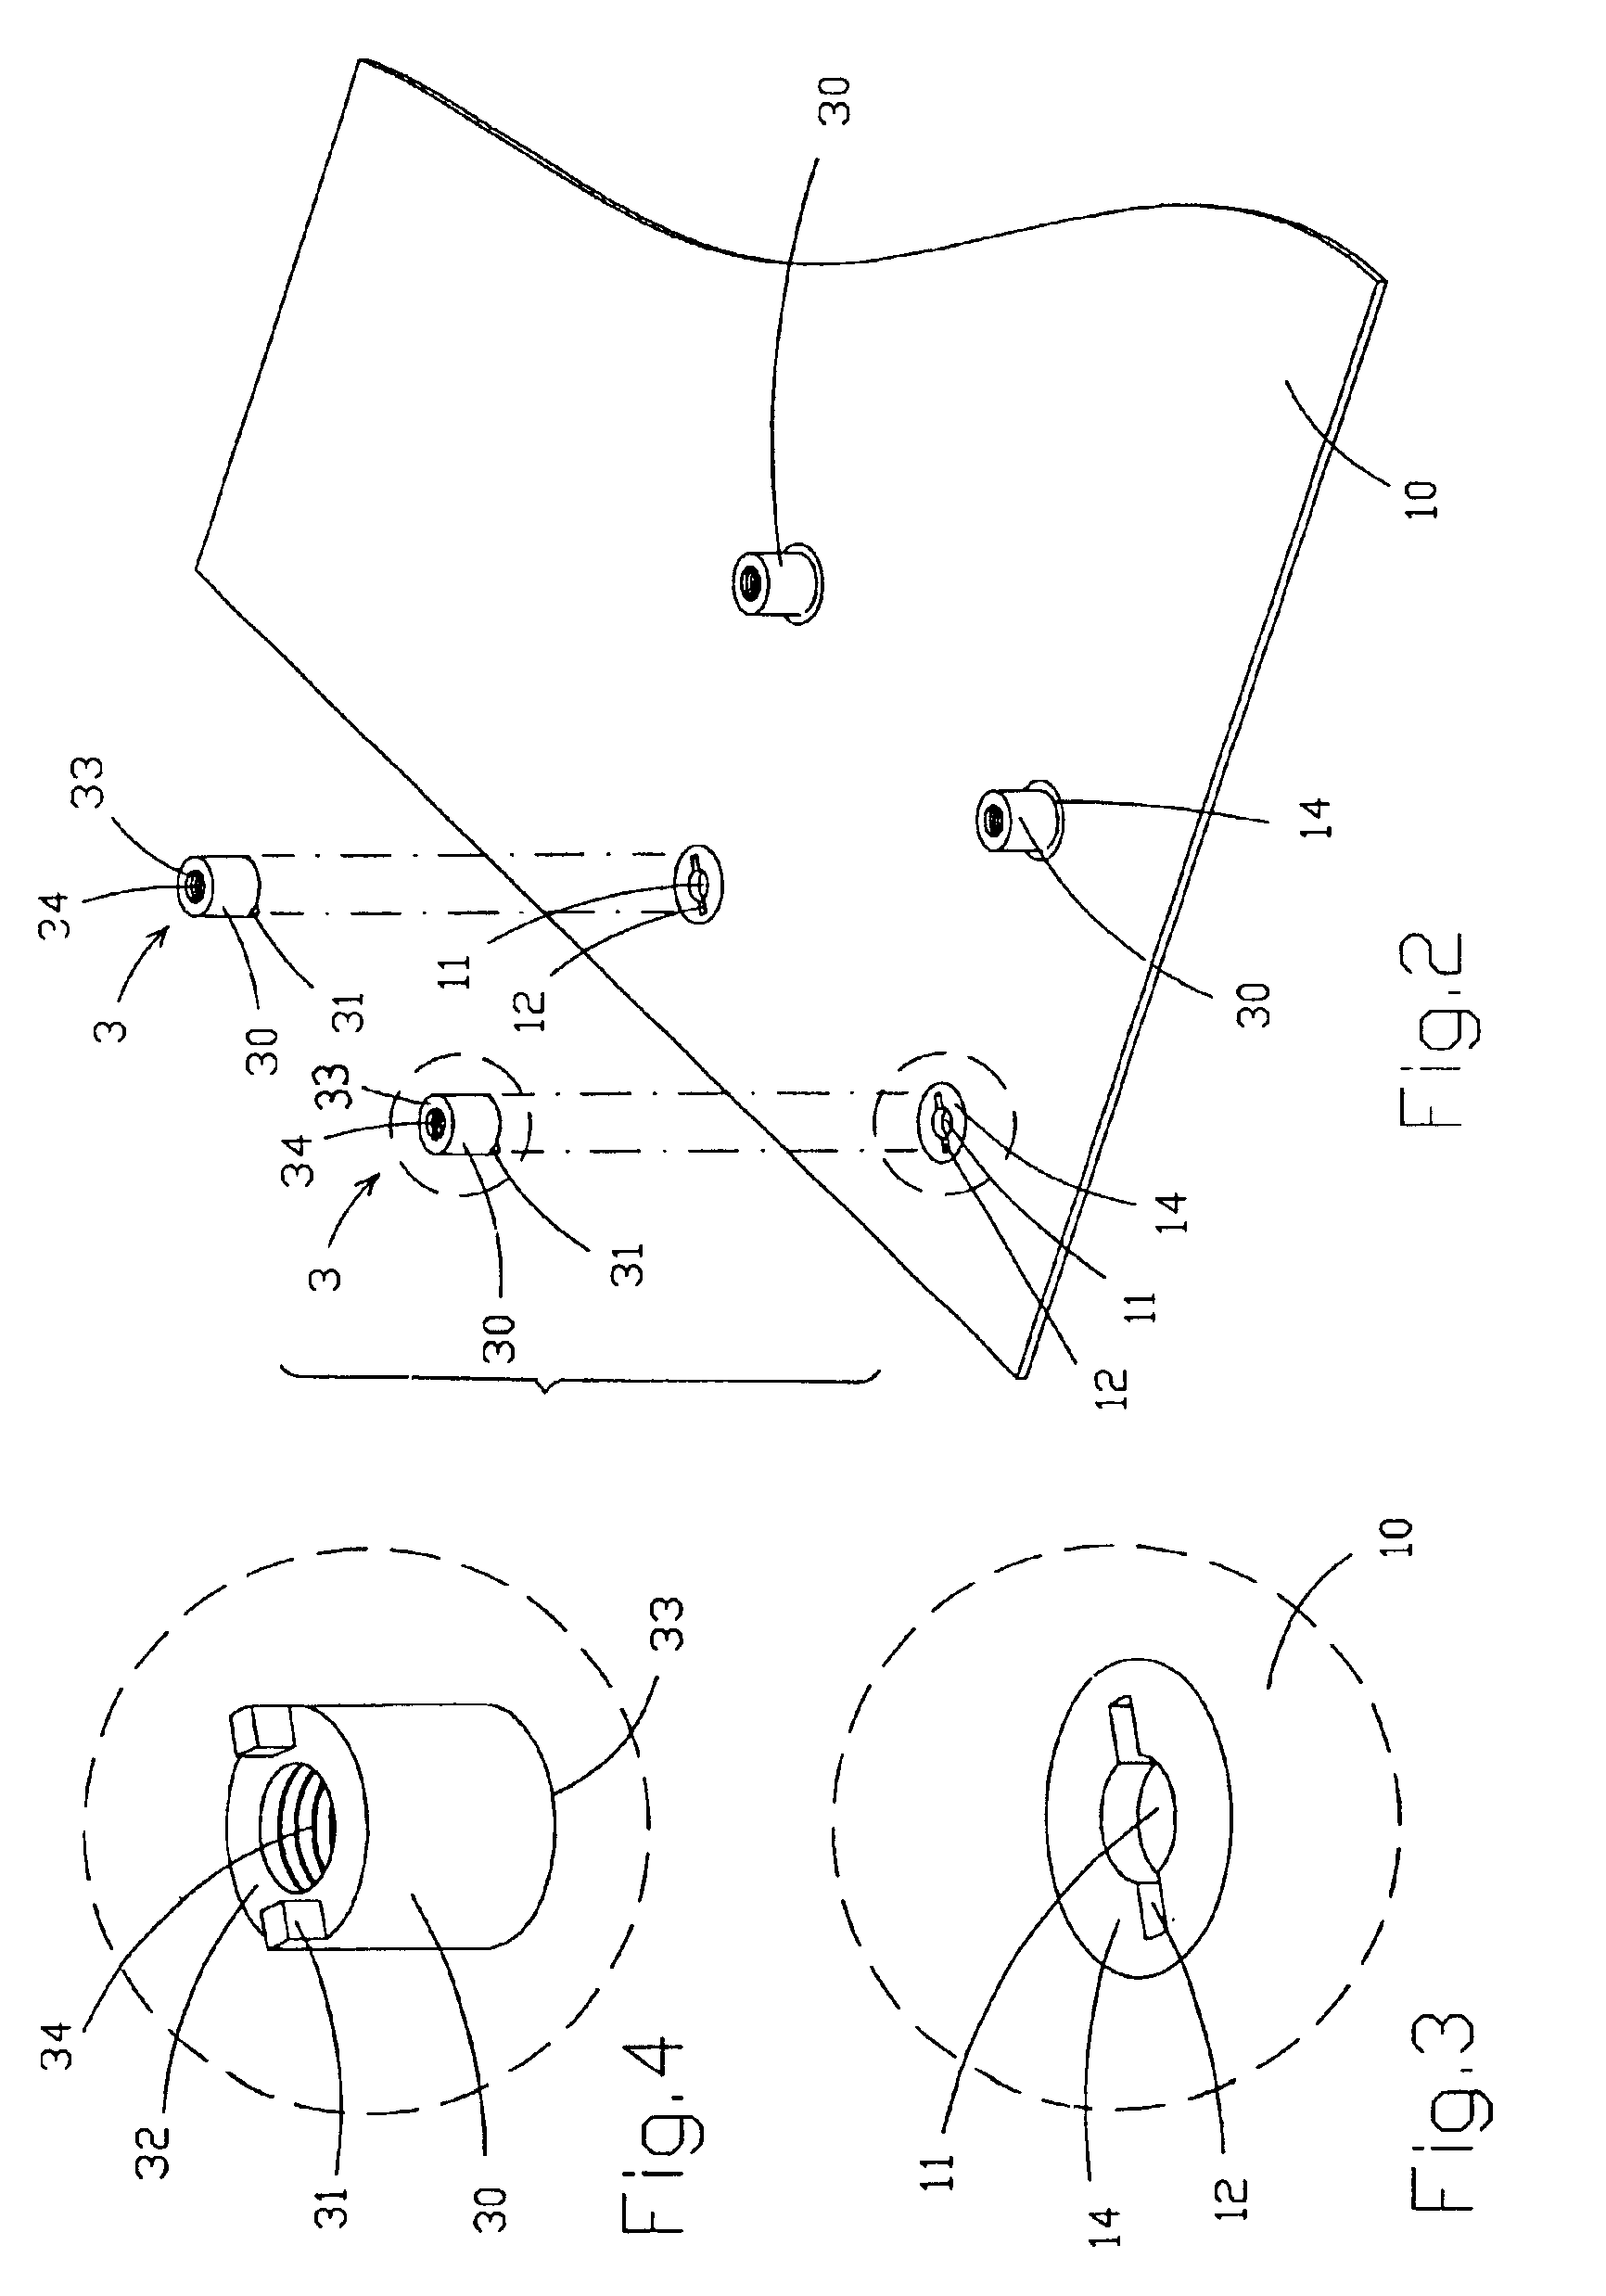 Device for anchoring components on circuit board